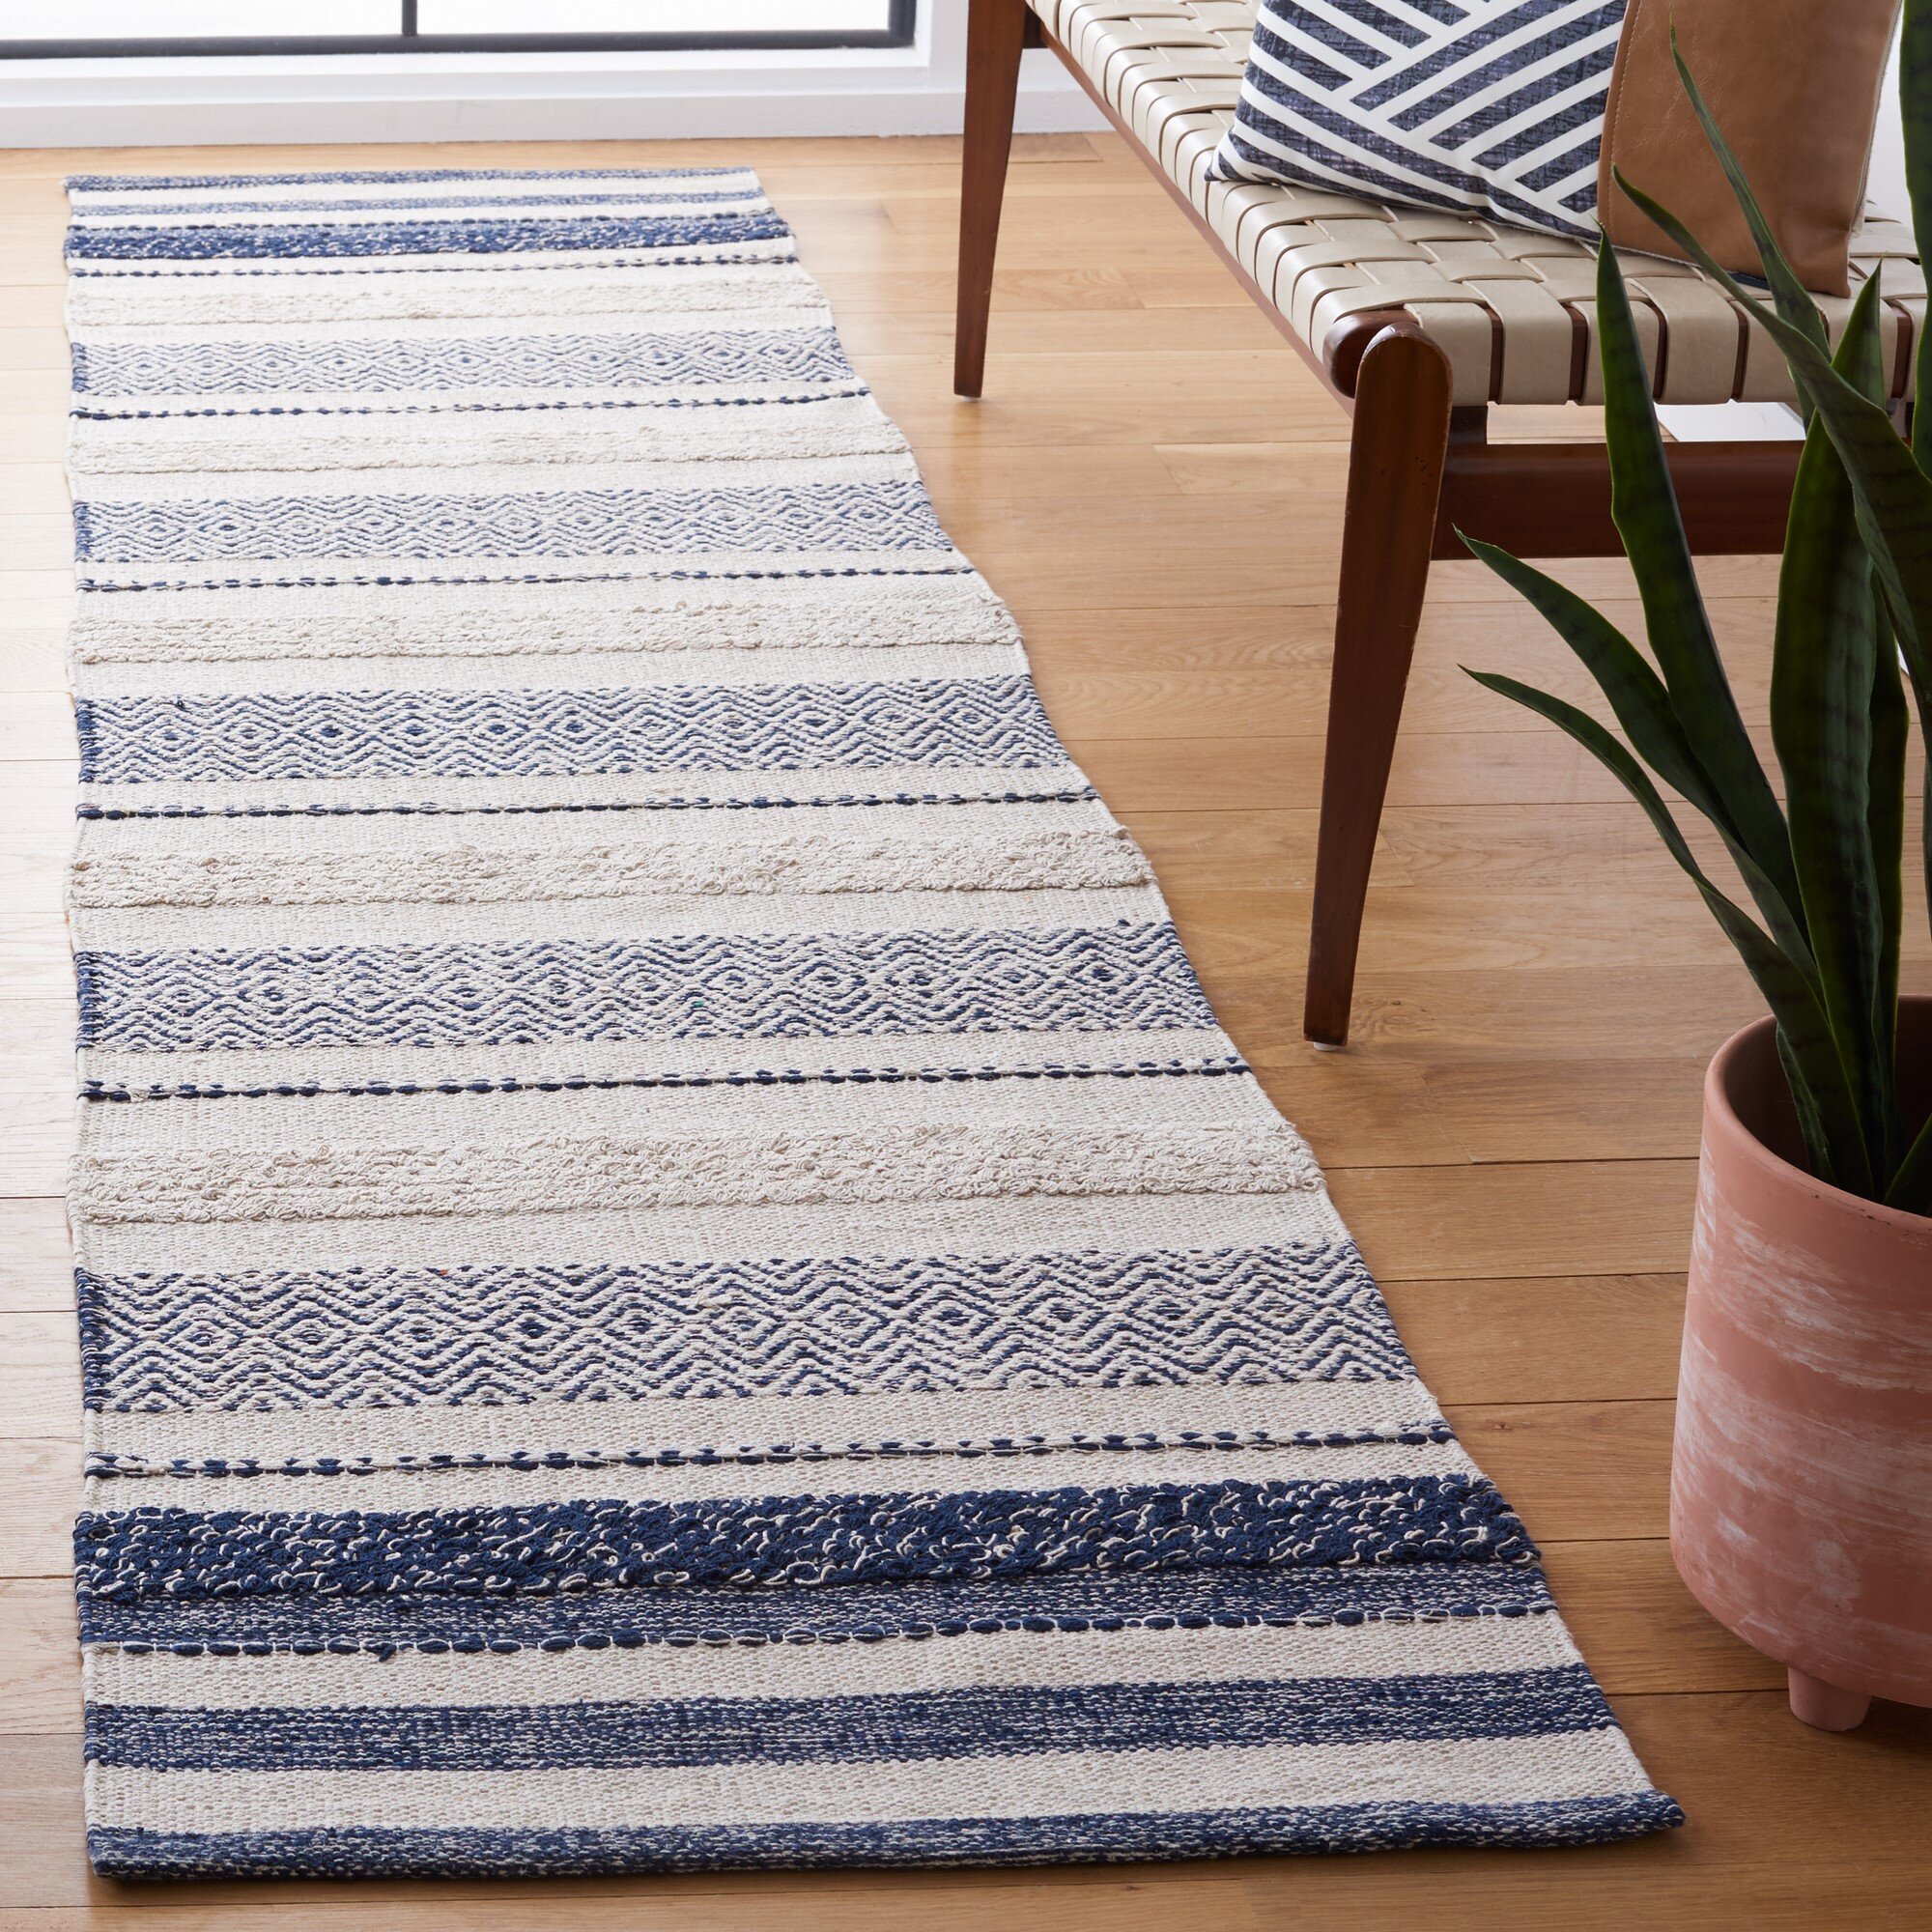 Traditional Beautiful Classic Area Rug in Navy Ivory 2x3 5x7 6x9